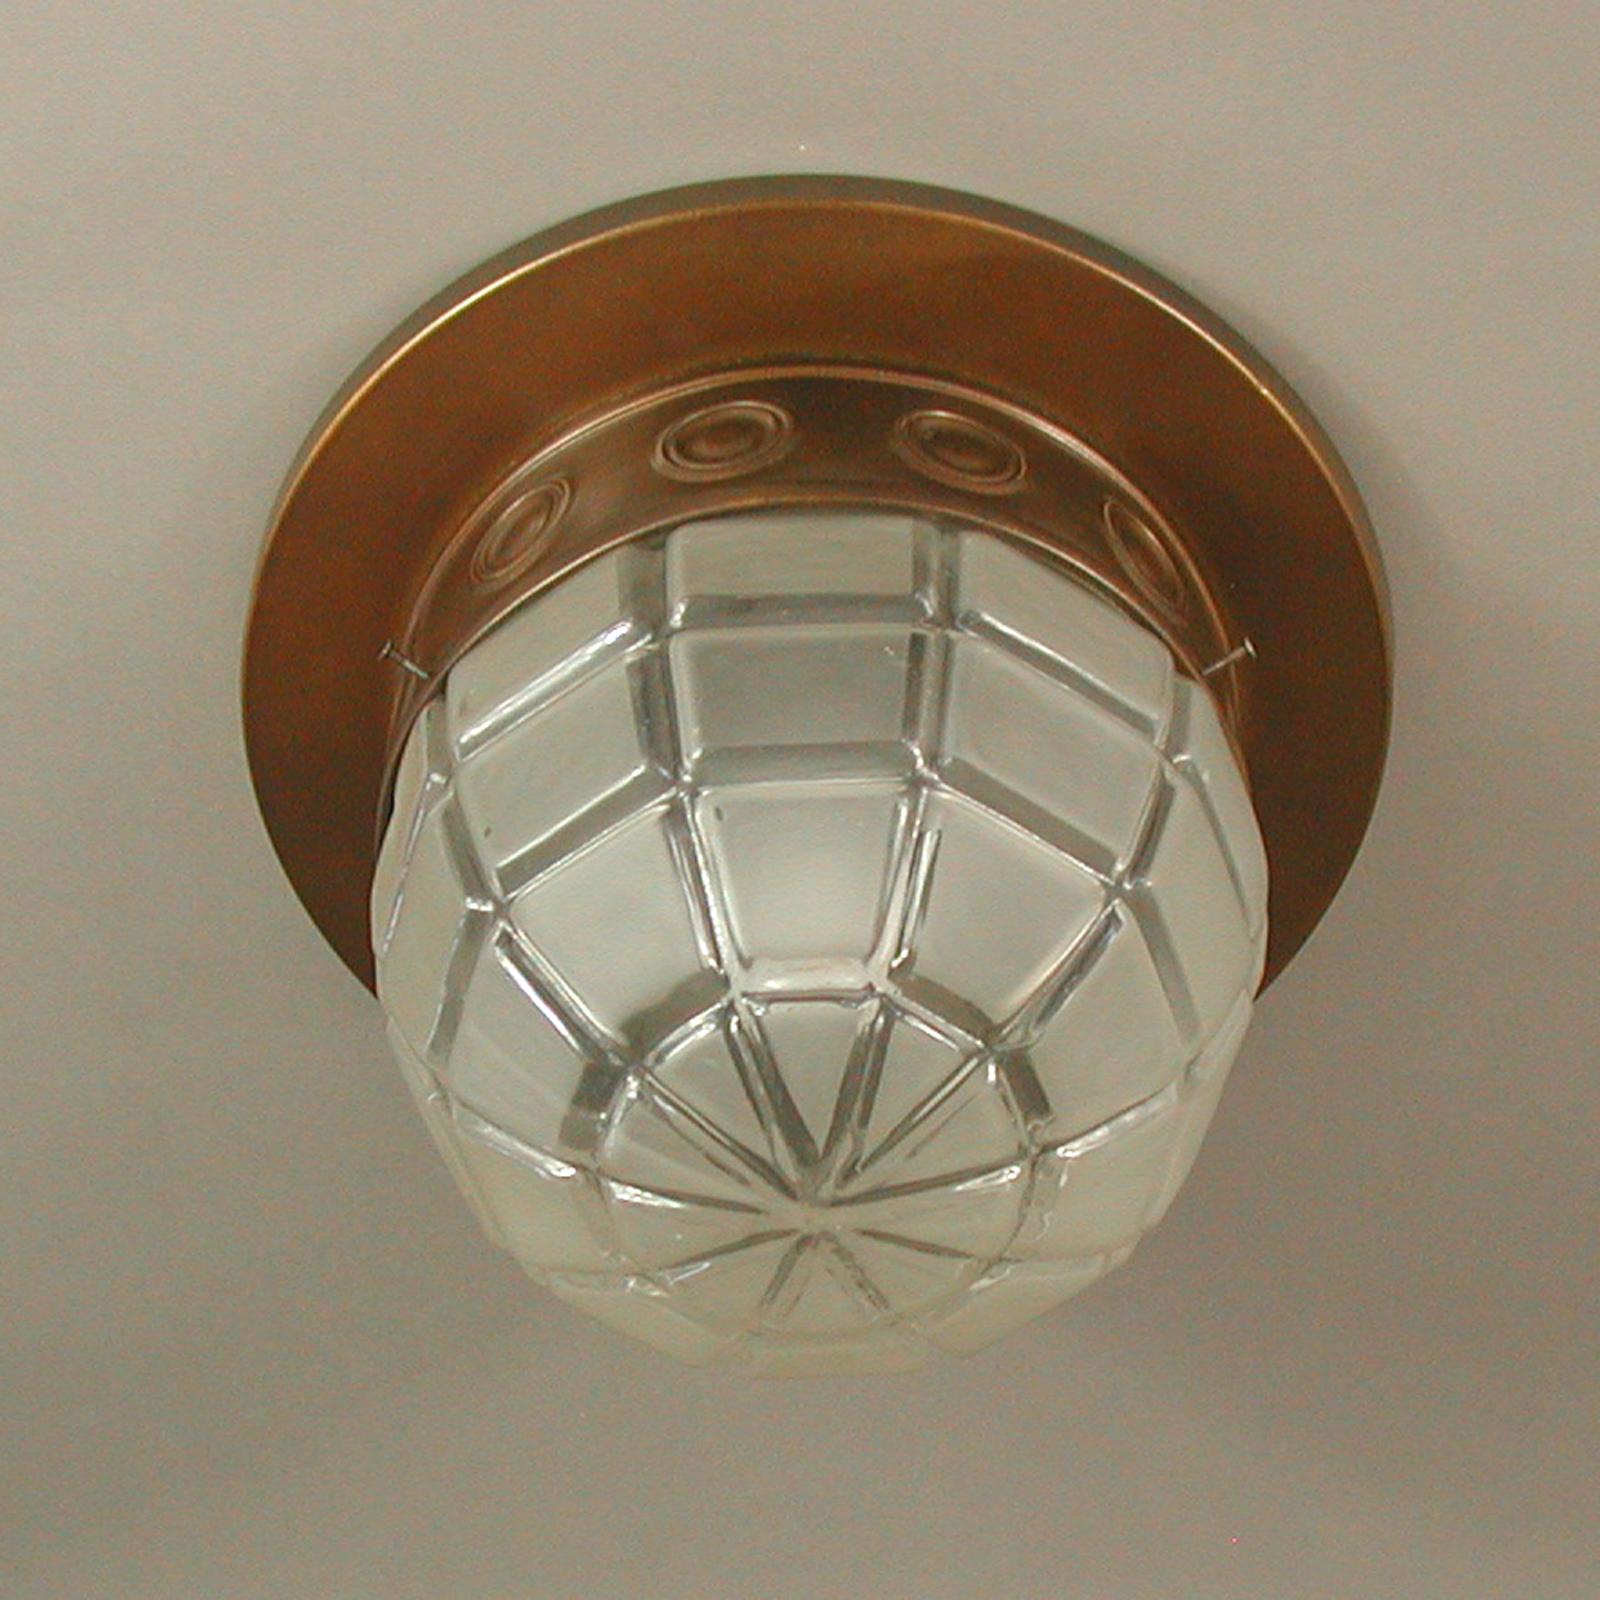 Early 20th Century Art Deco Bronzed Metal and Satin Glass Flush Mount, Austria 1910 to 1920